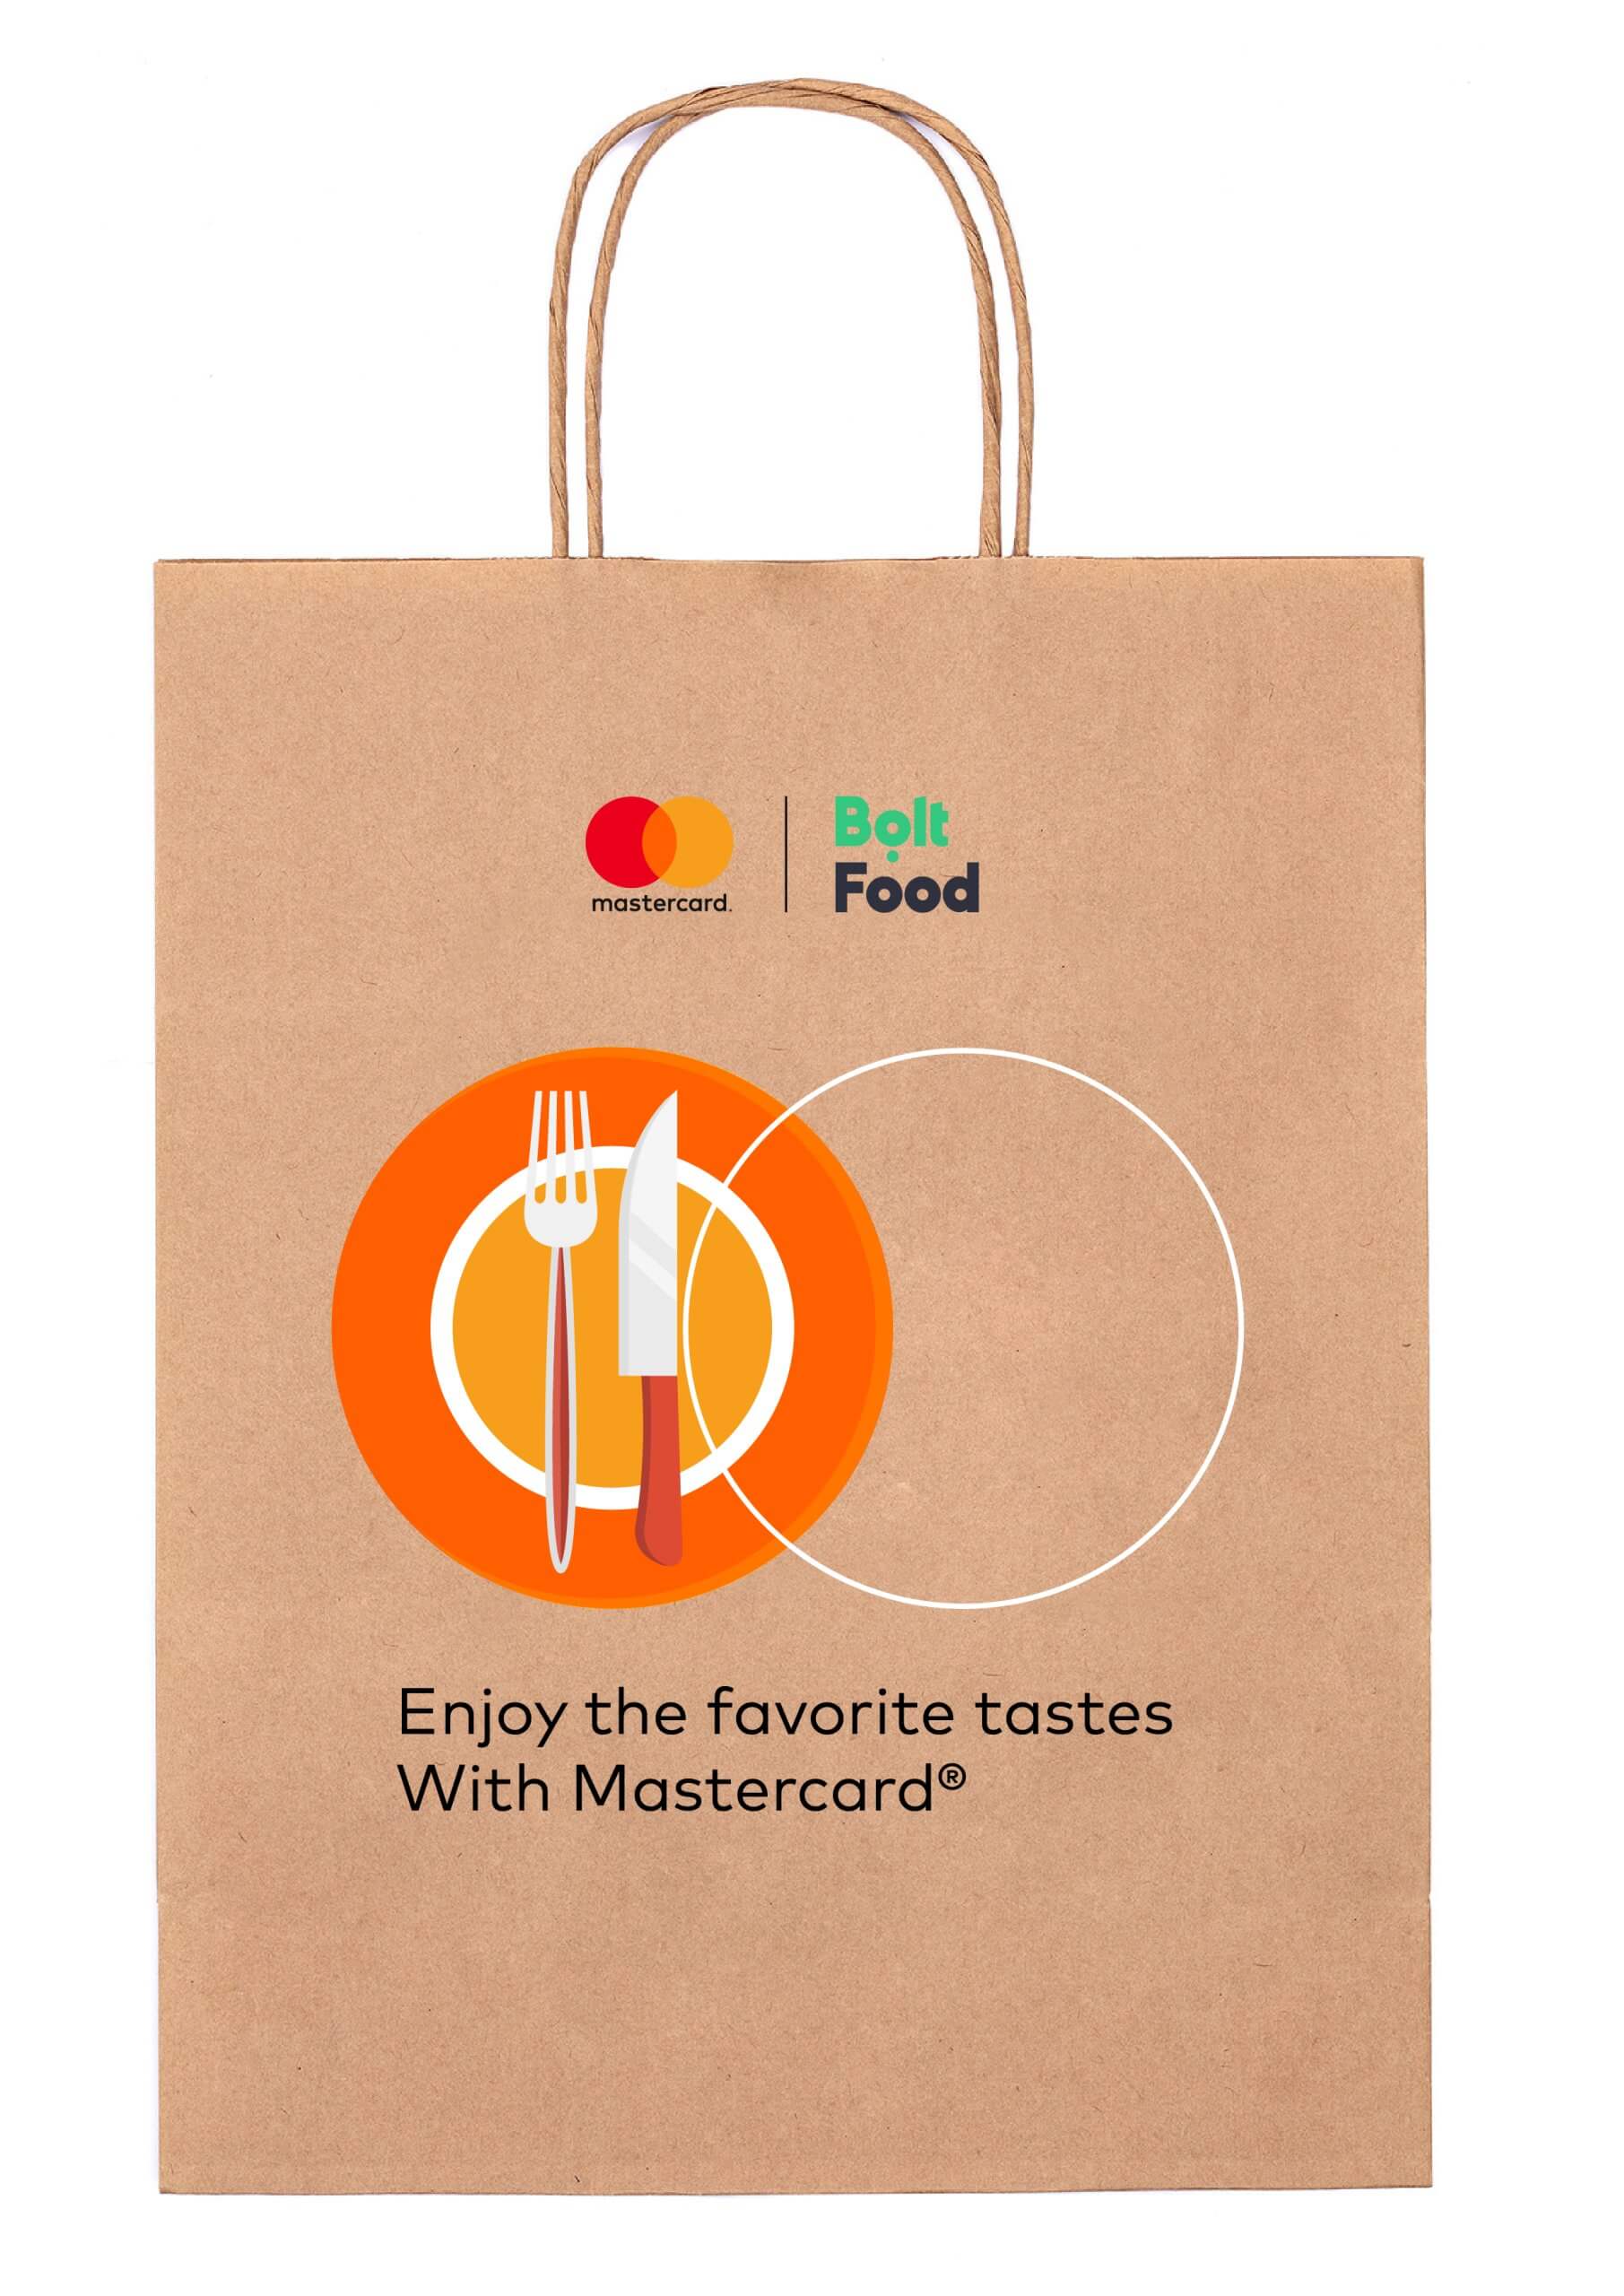 Bolt Food x Mastercard packages